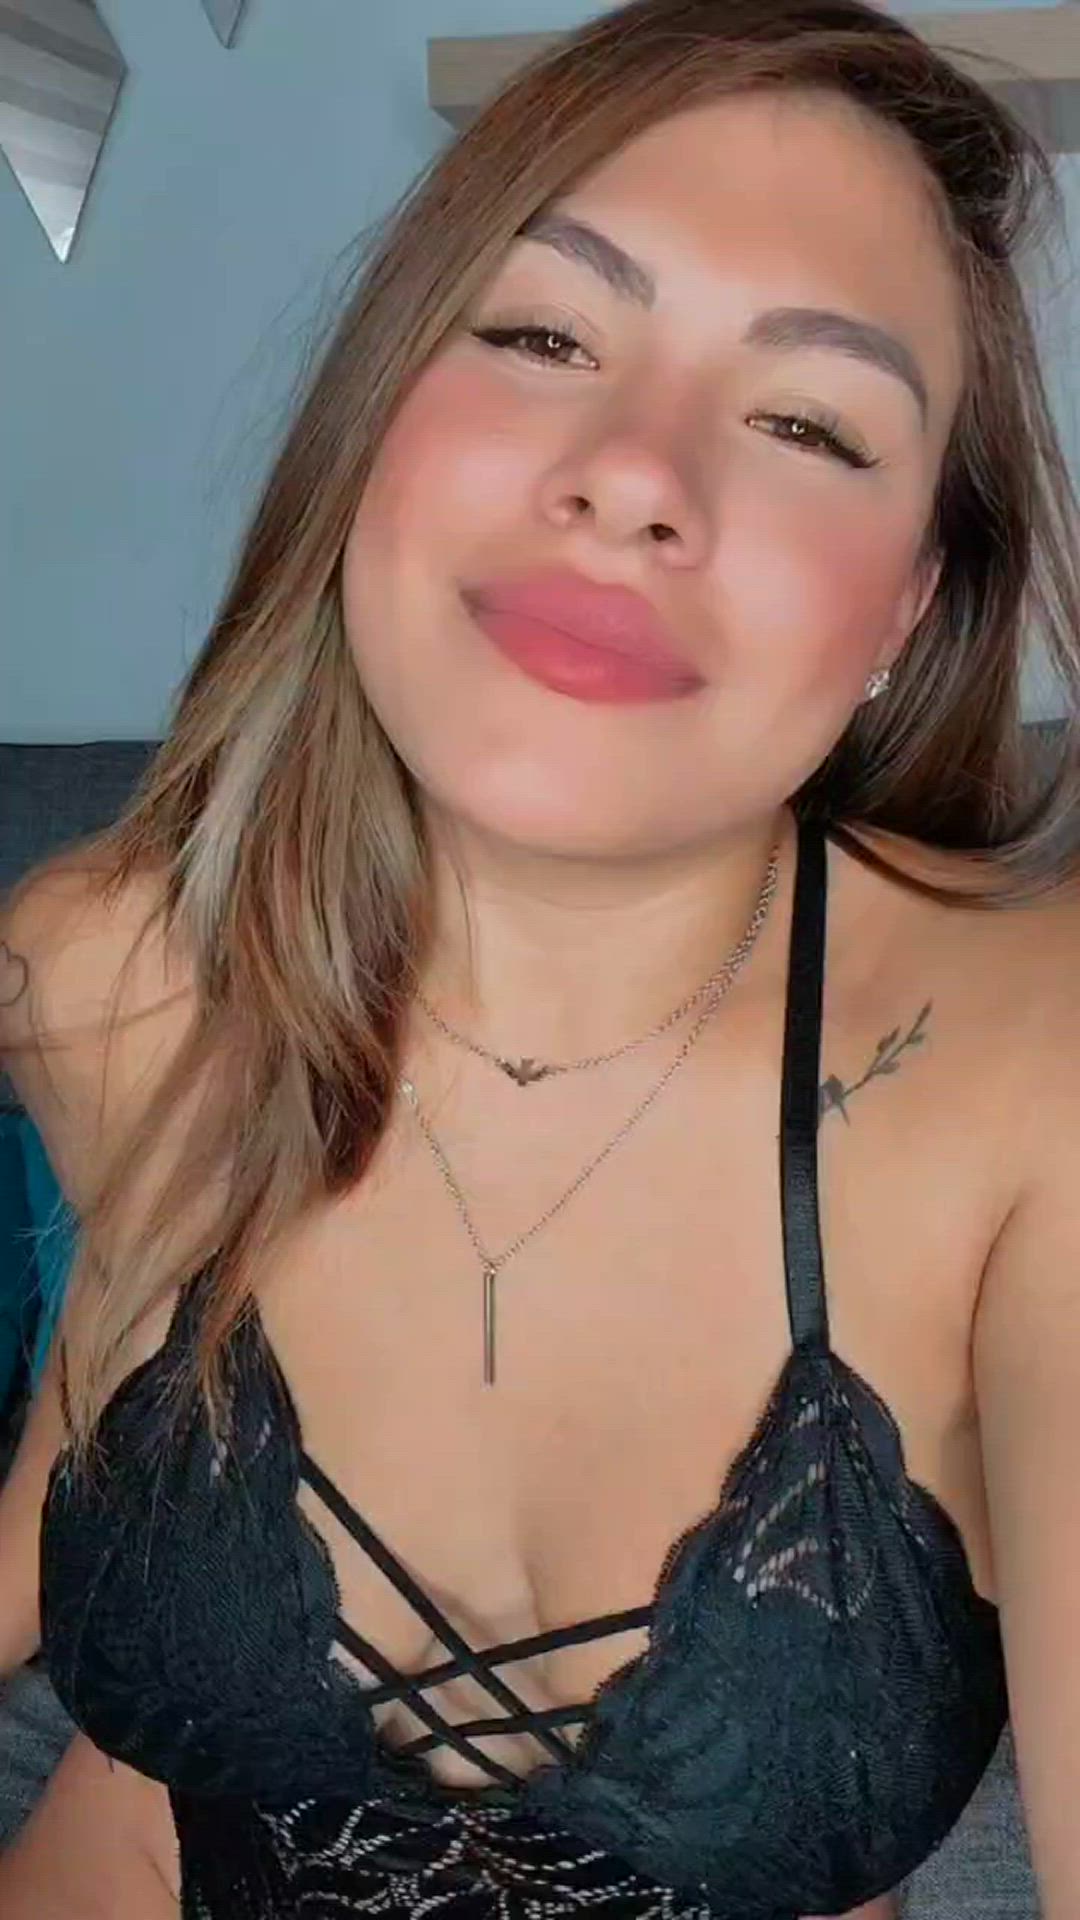 Latina porn video with onlyfans model onlylucianagarcia <strong>@luciana.garcia</strong>